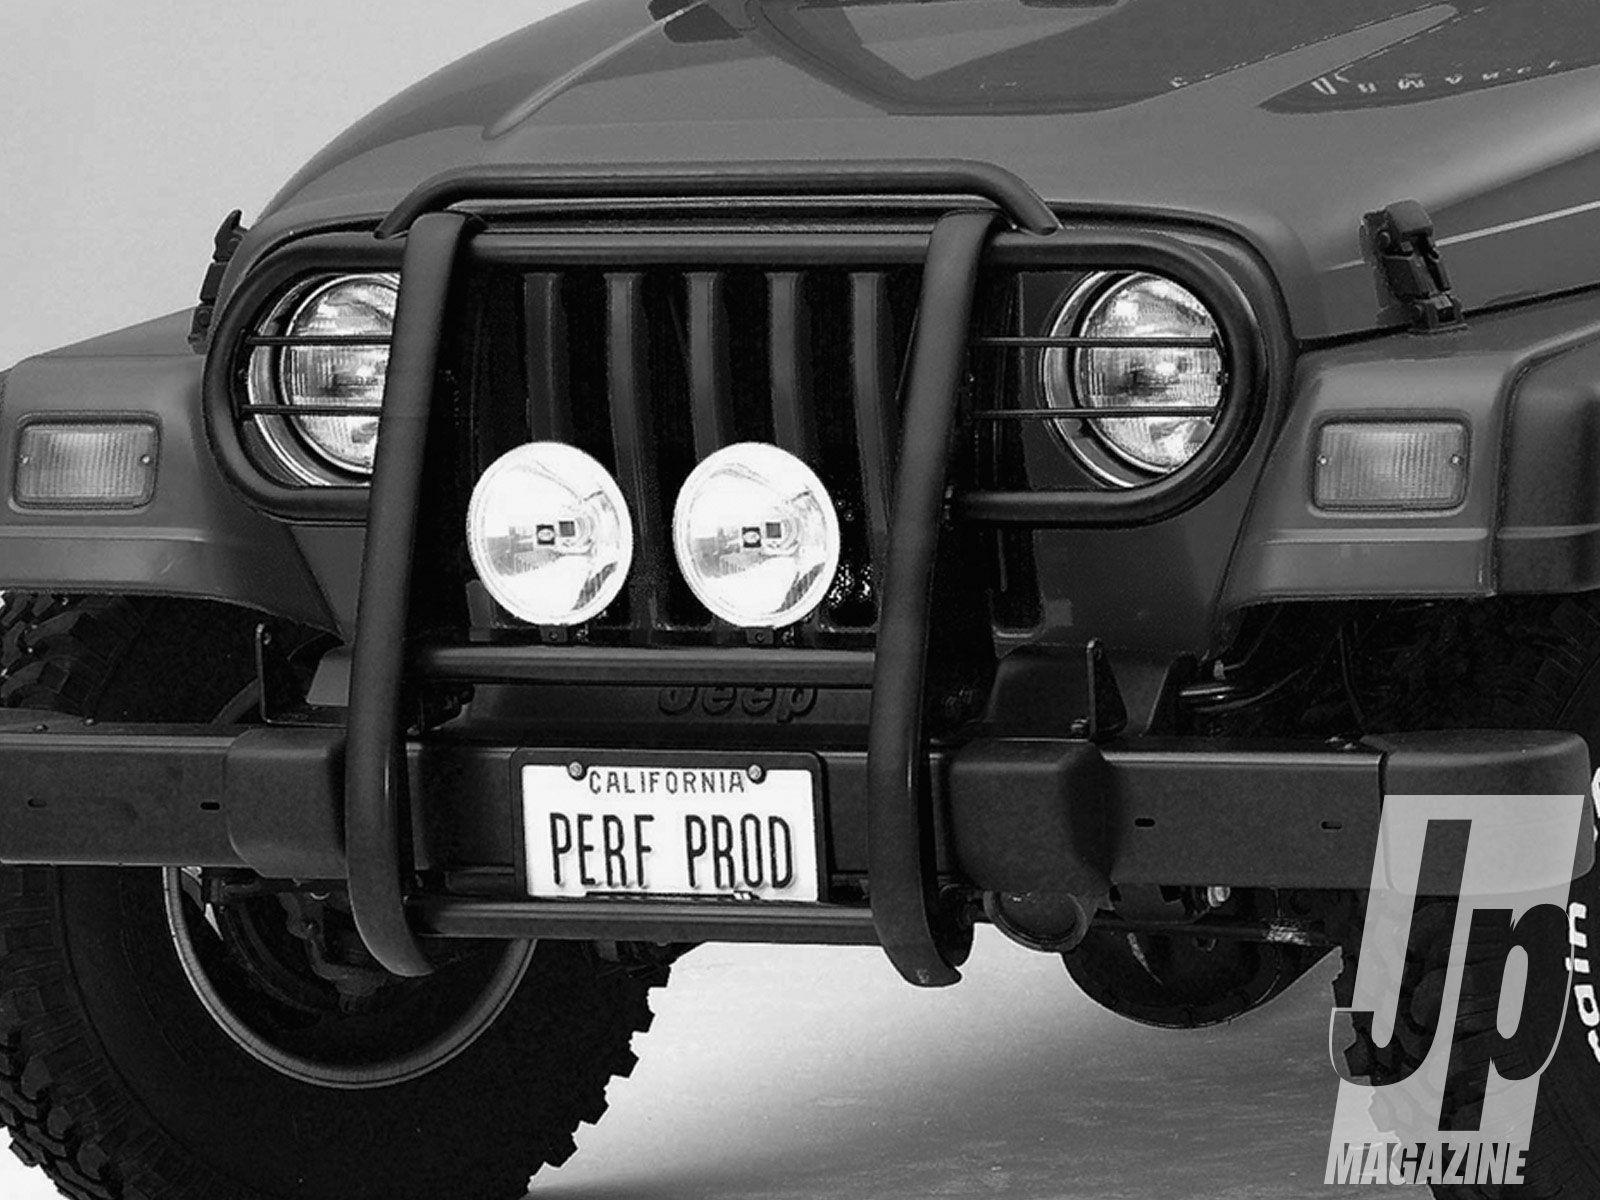 Jeep TJ Grill Logo - WRG 3497 Jeep Wrangler Brush Guard User Manuals Ebook Library